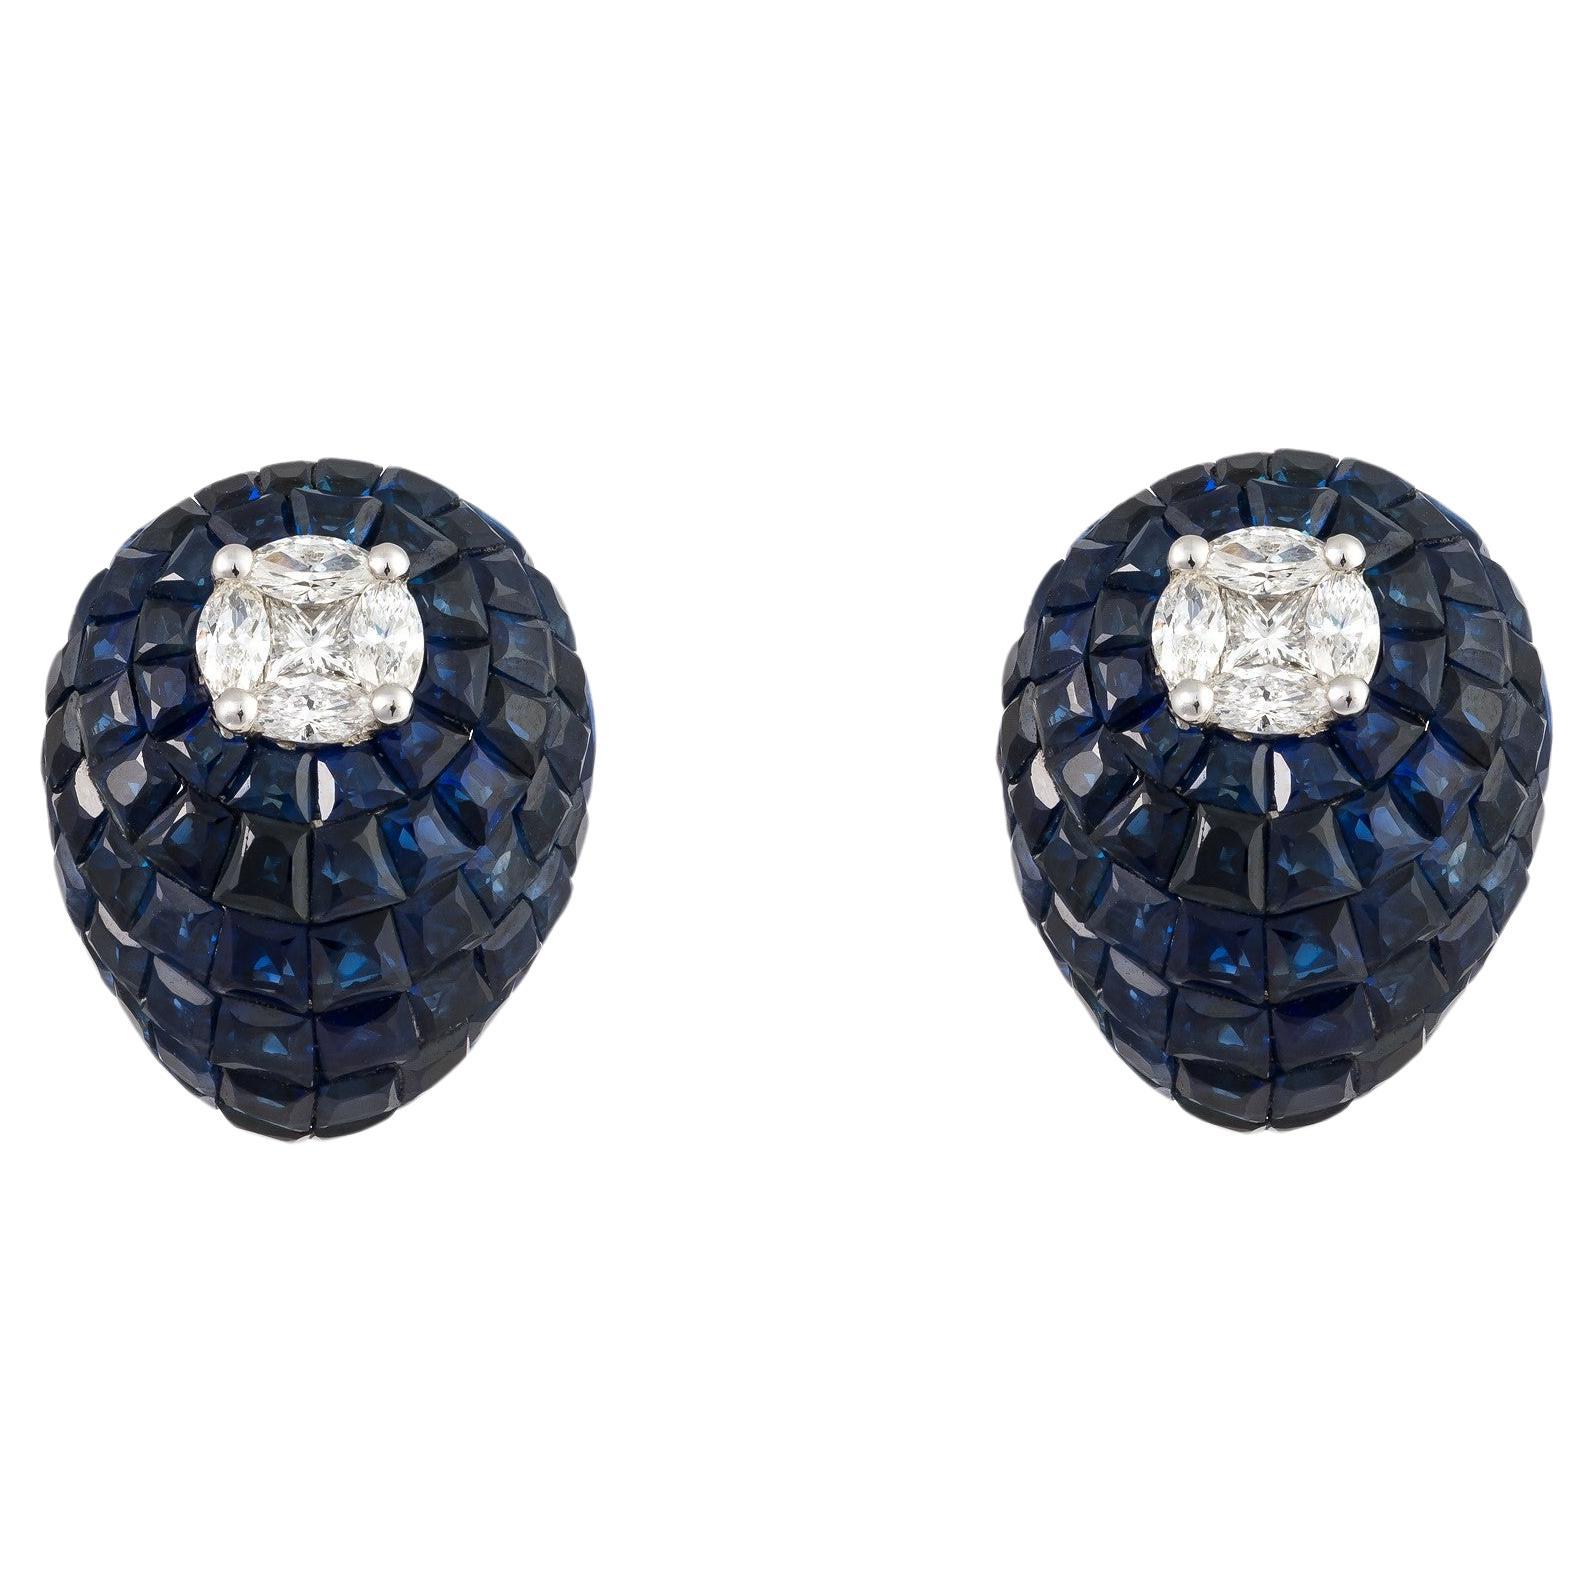 NWT $20, 800 18KT Gold Rare Gorgeous Blue Sapphire Diamond Bombe Earrings For Sale